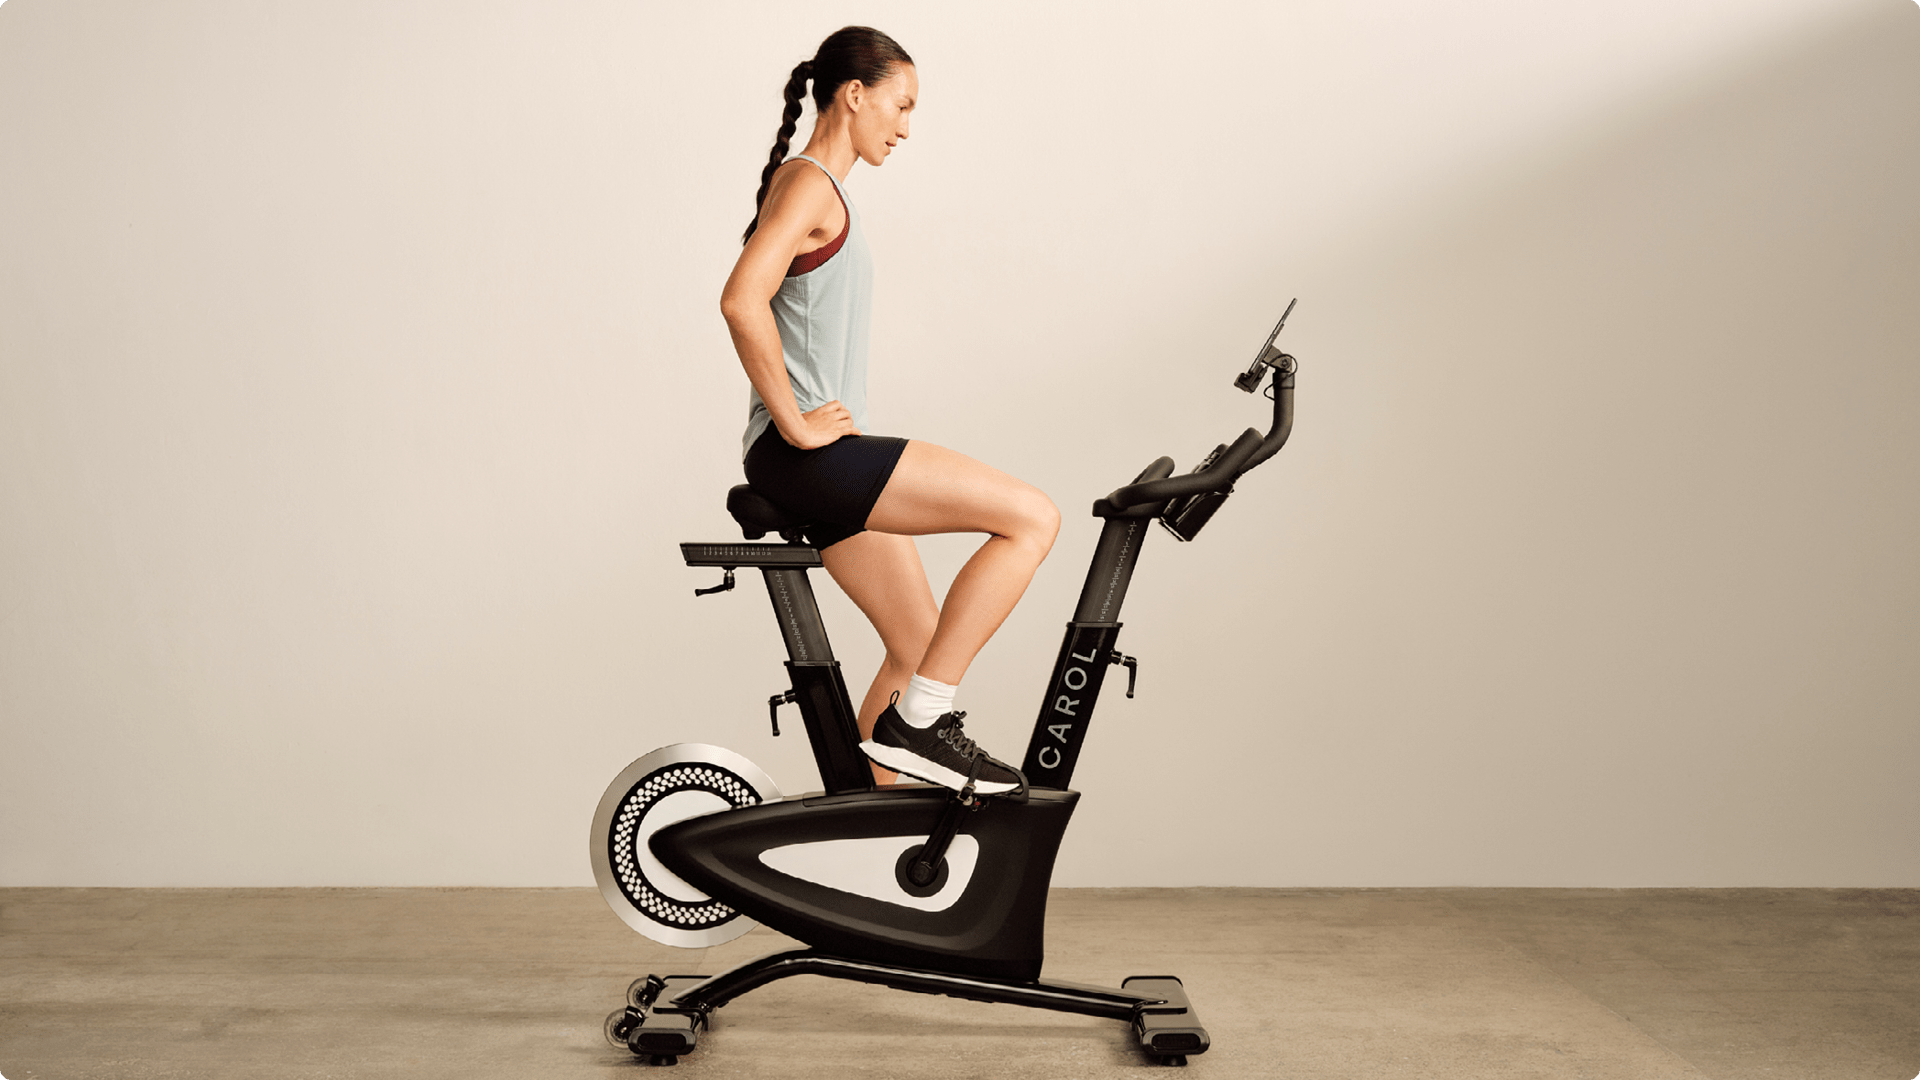 Pedal Your Way to Improved Cardiovascular Fitness